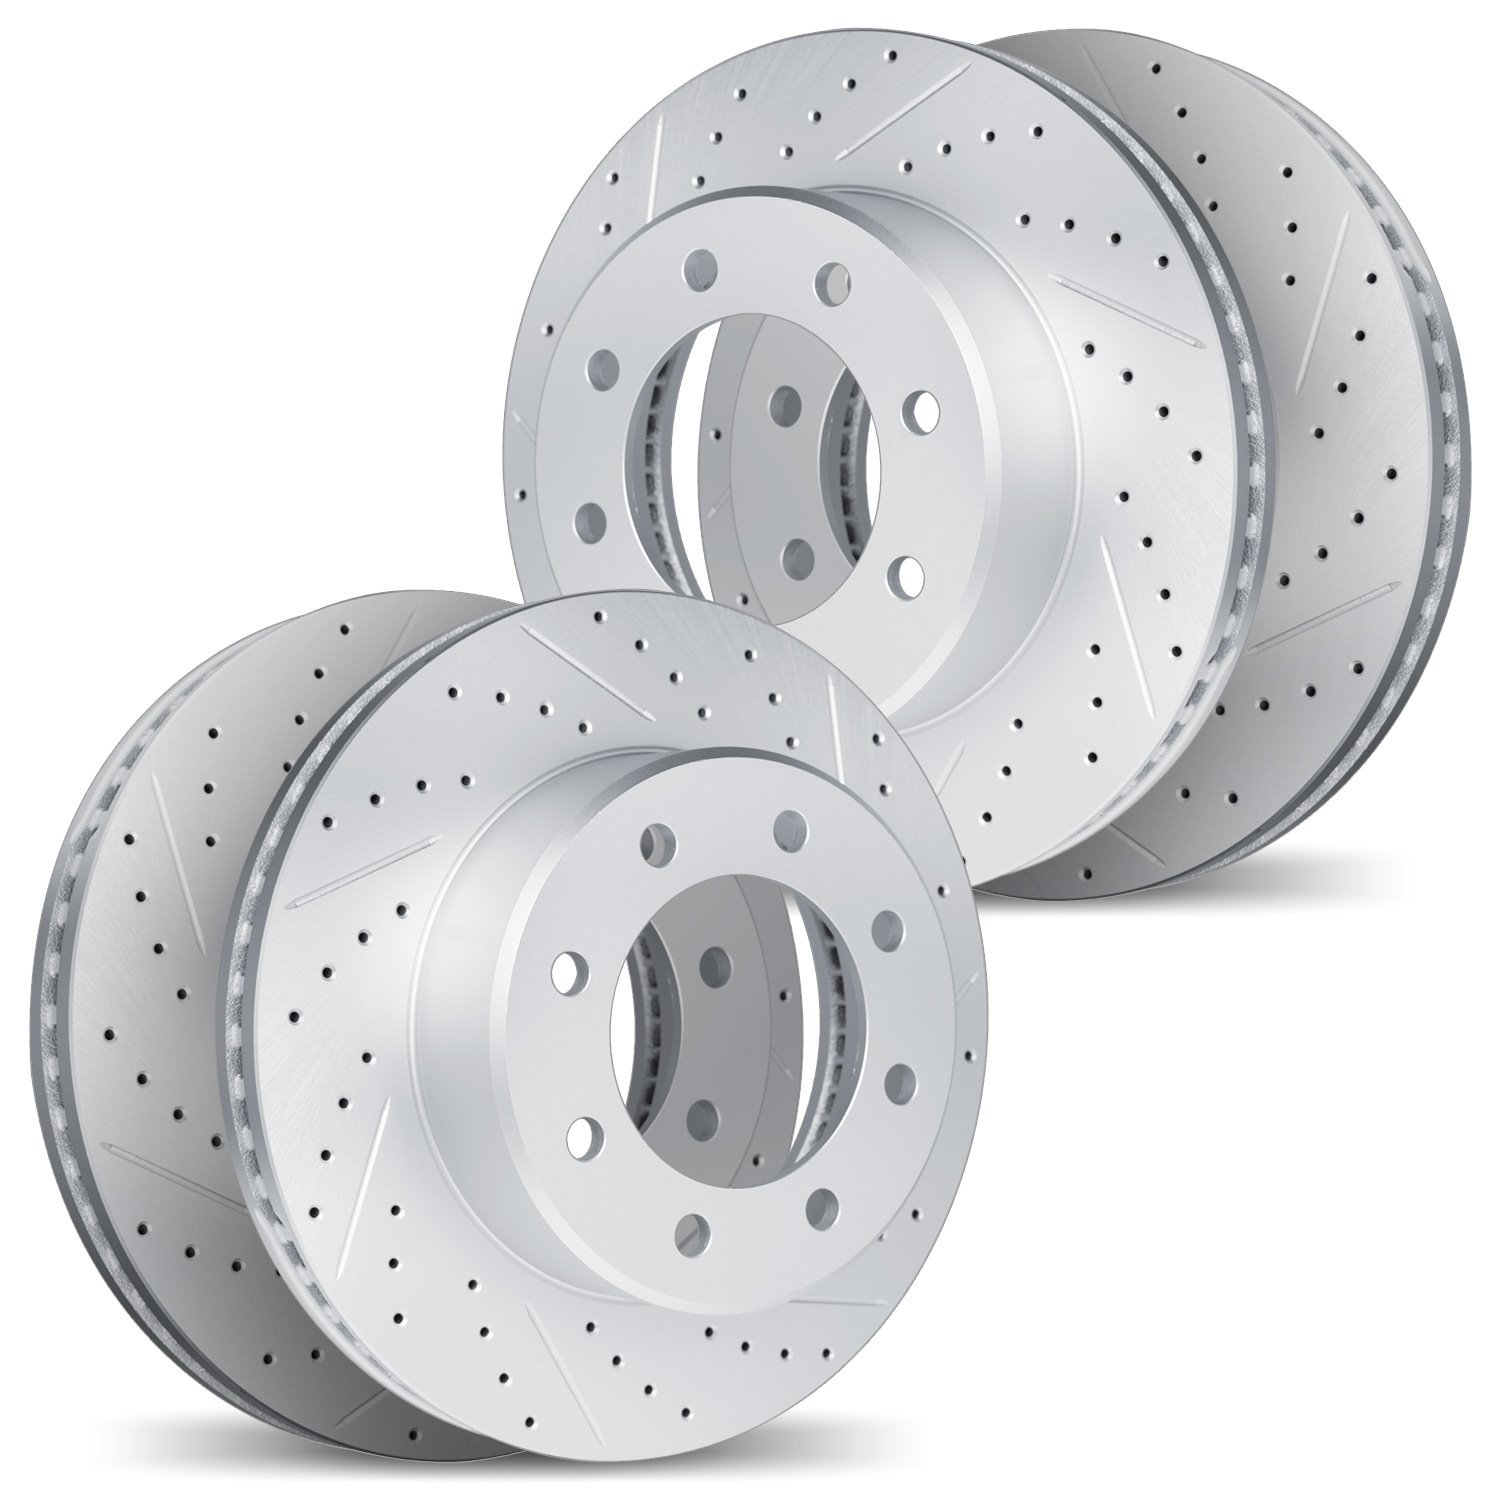 2004-54118 Geoperformance Drilled/Slotted Brake Rotors, 2005-2007 Ford/Lincoln/Mercury/Mazda, Position: Front and Rear